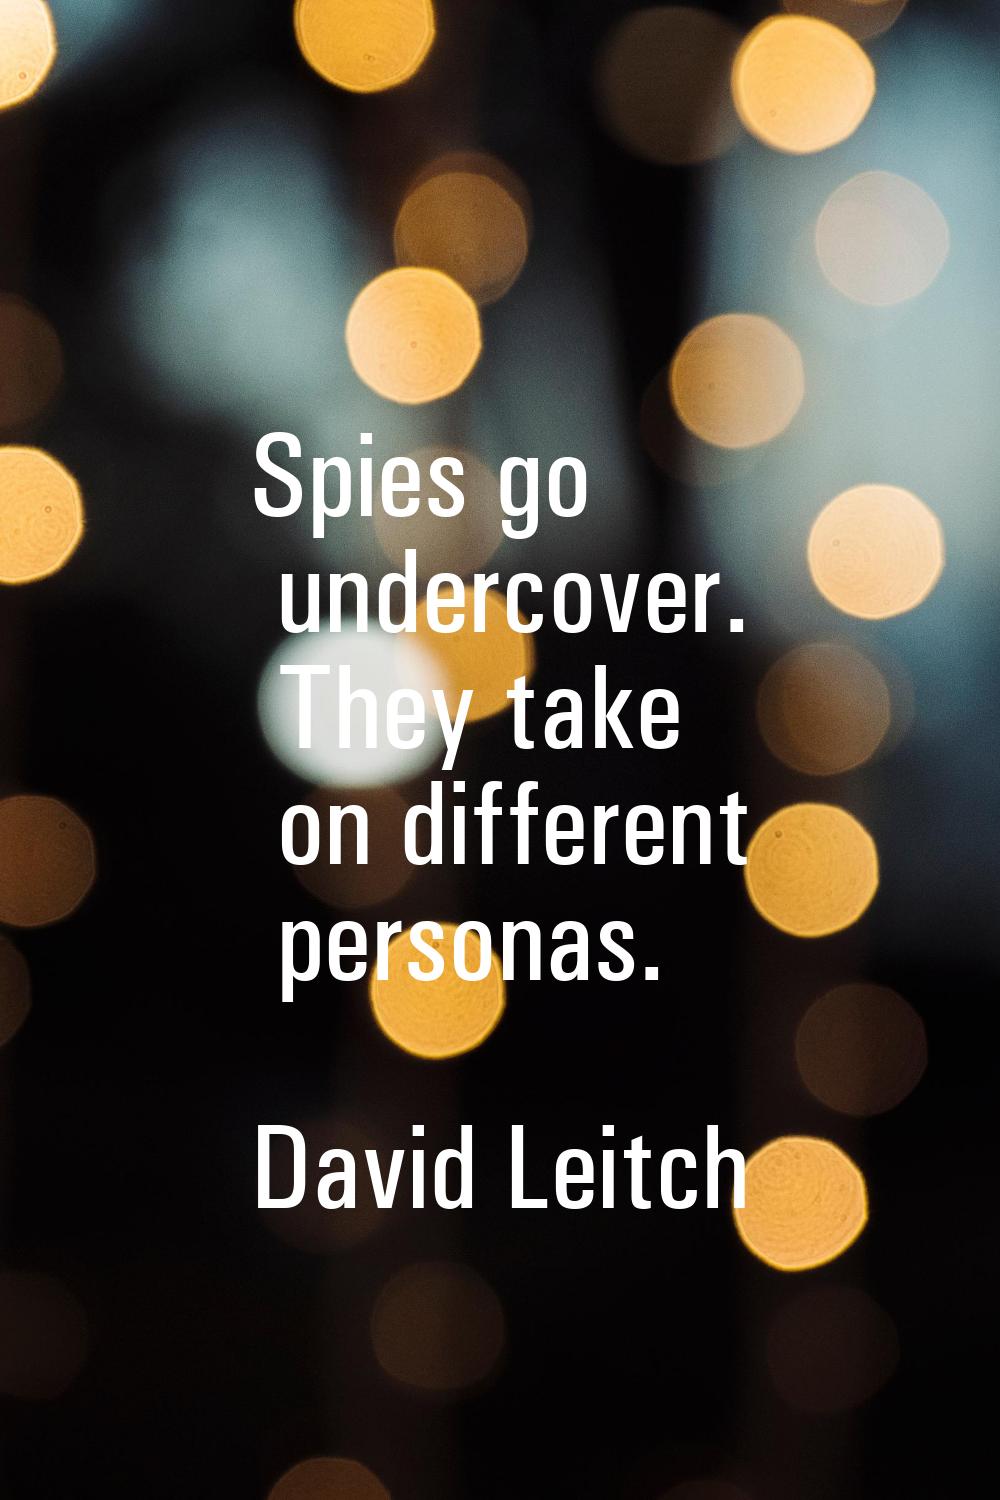 Spies go undercover. They take on different personas.